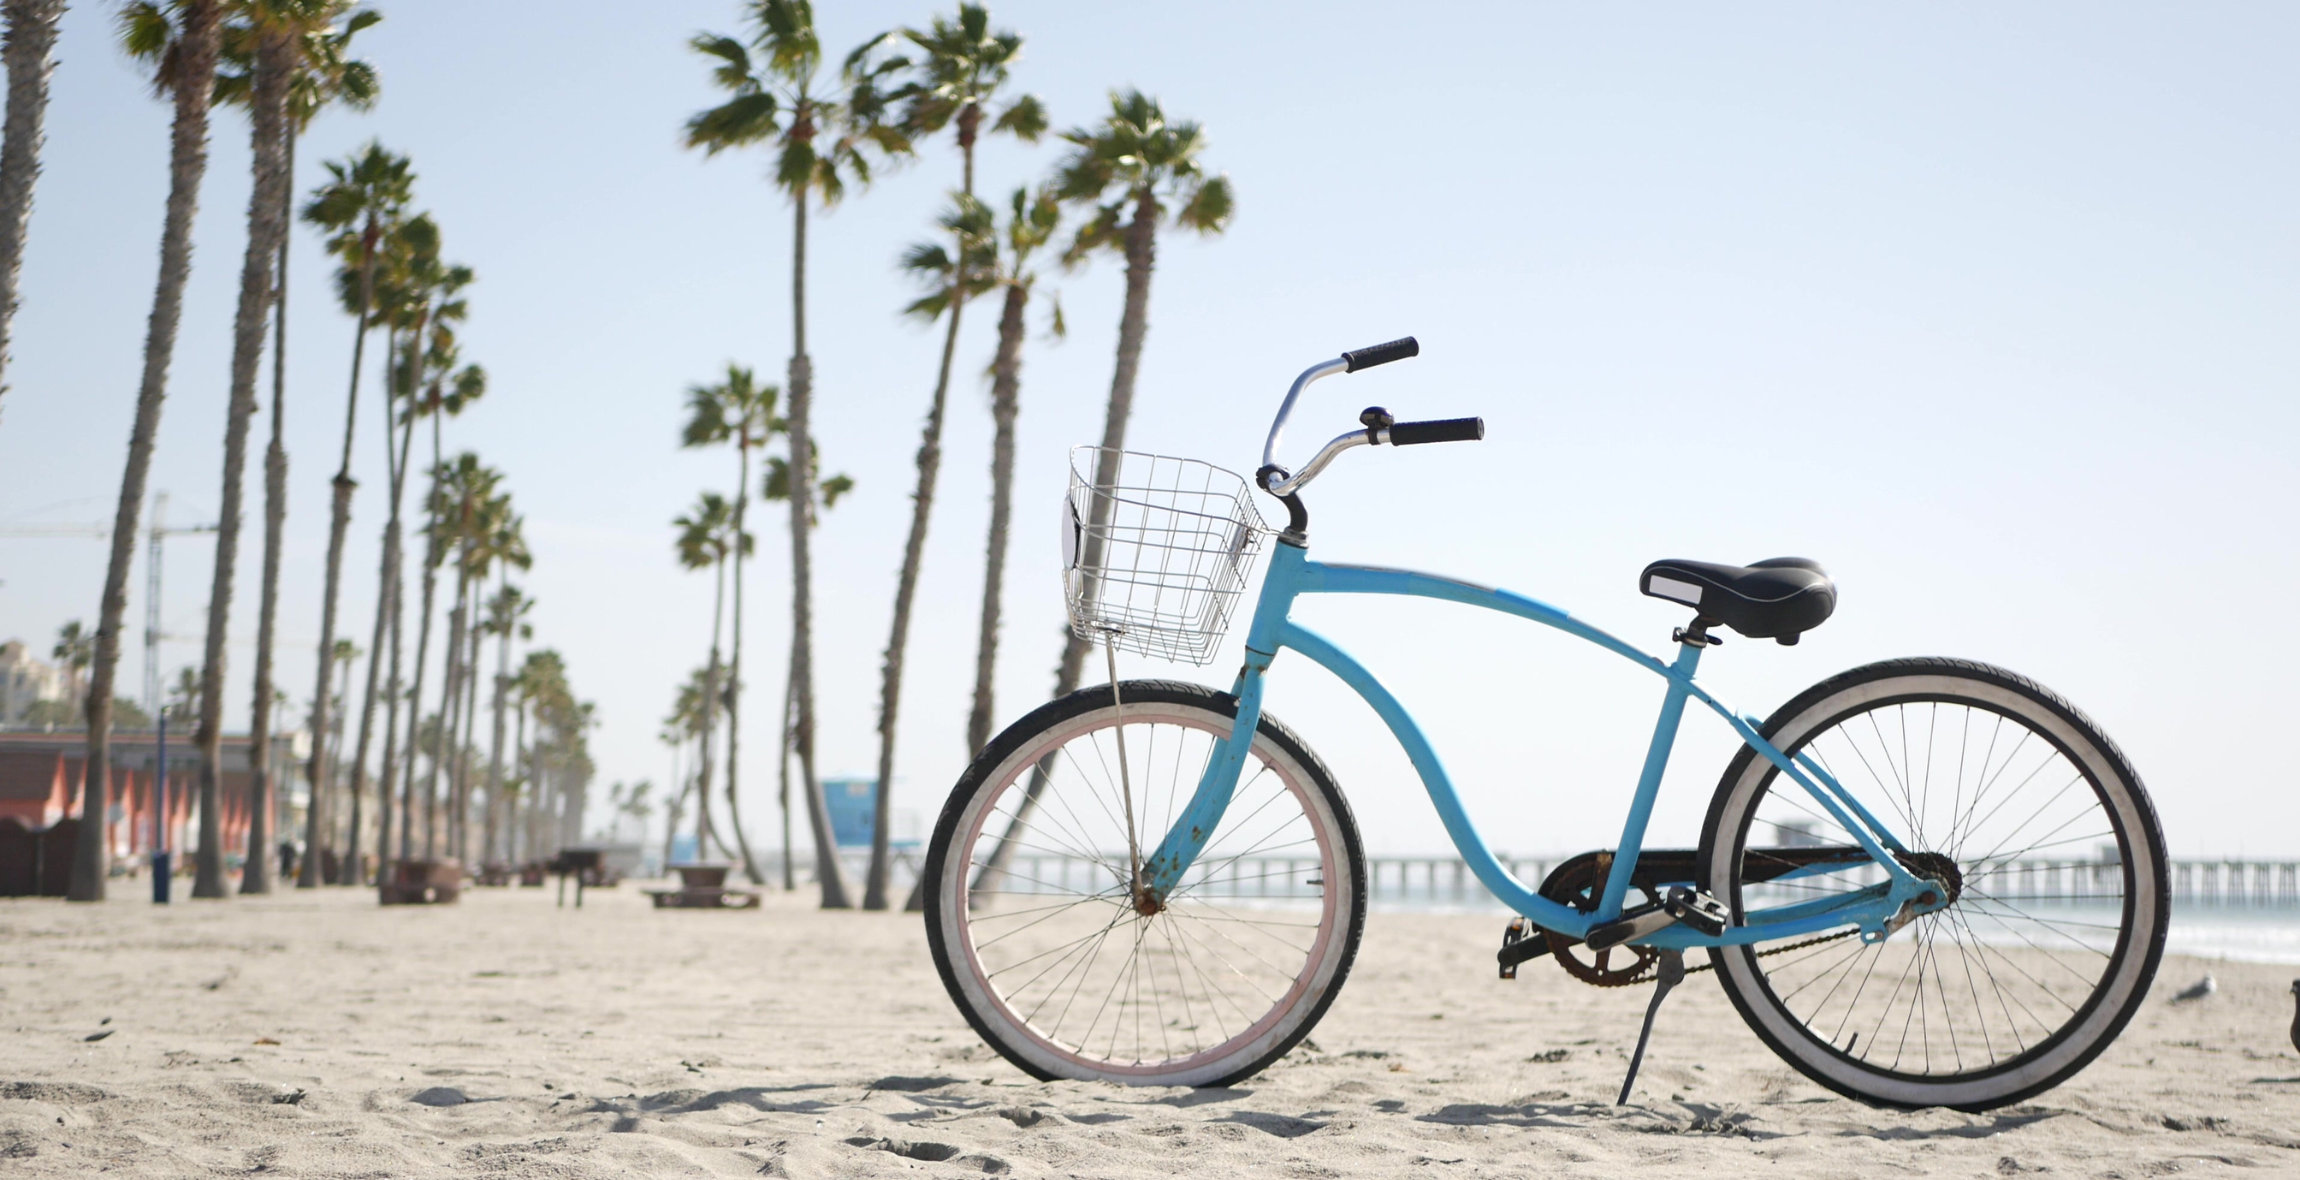 A bike stands on the sand of a beach with Palm Trees on a sunny day in California